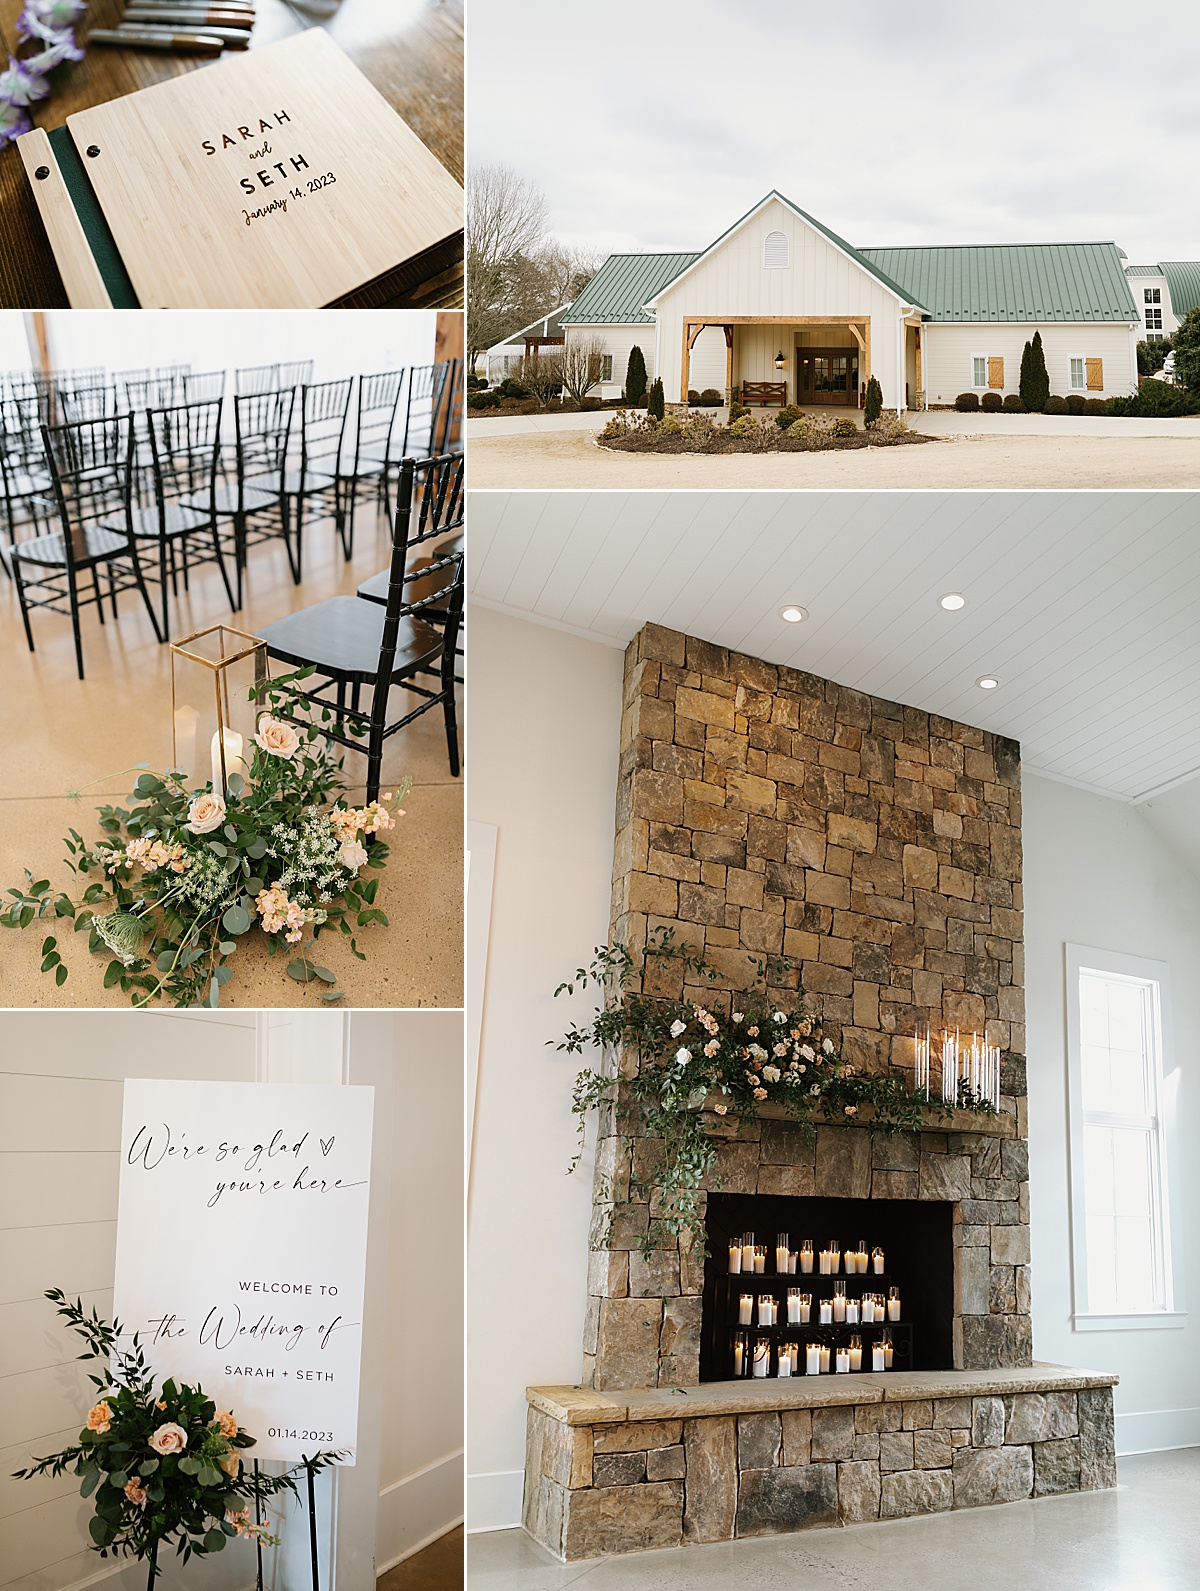 Indoor wedding ceremony details at Marblegate Farms in Tennessee.